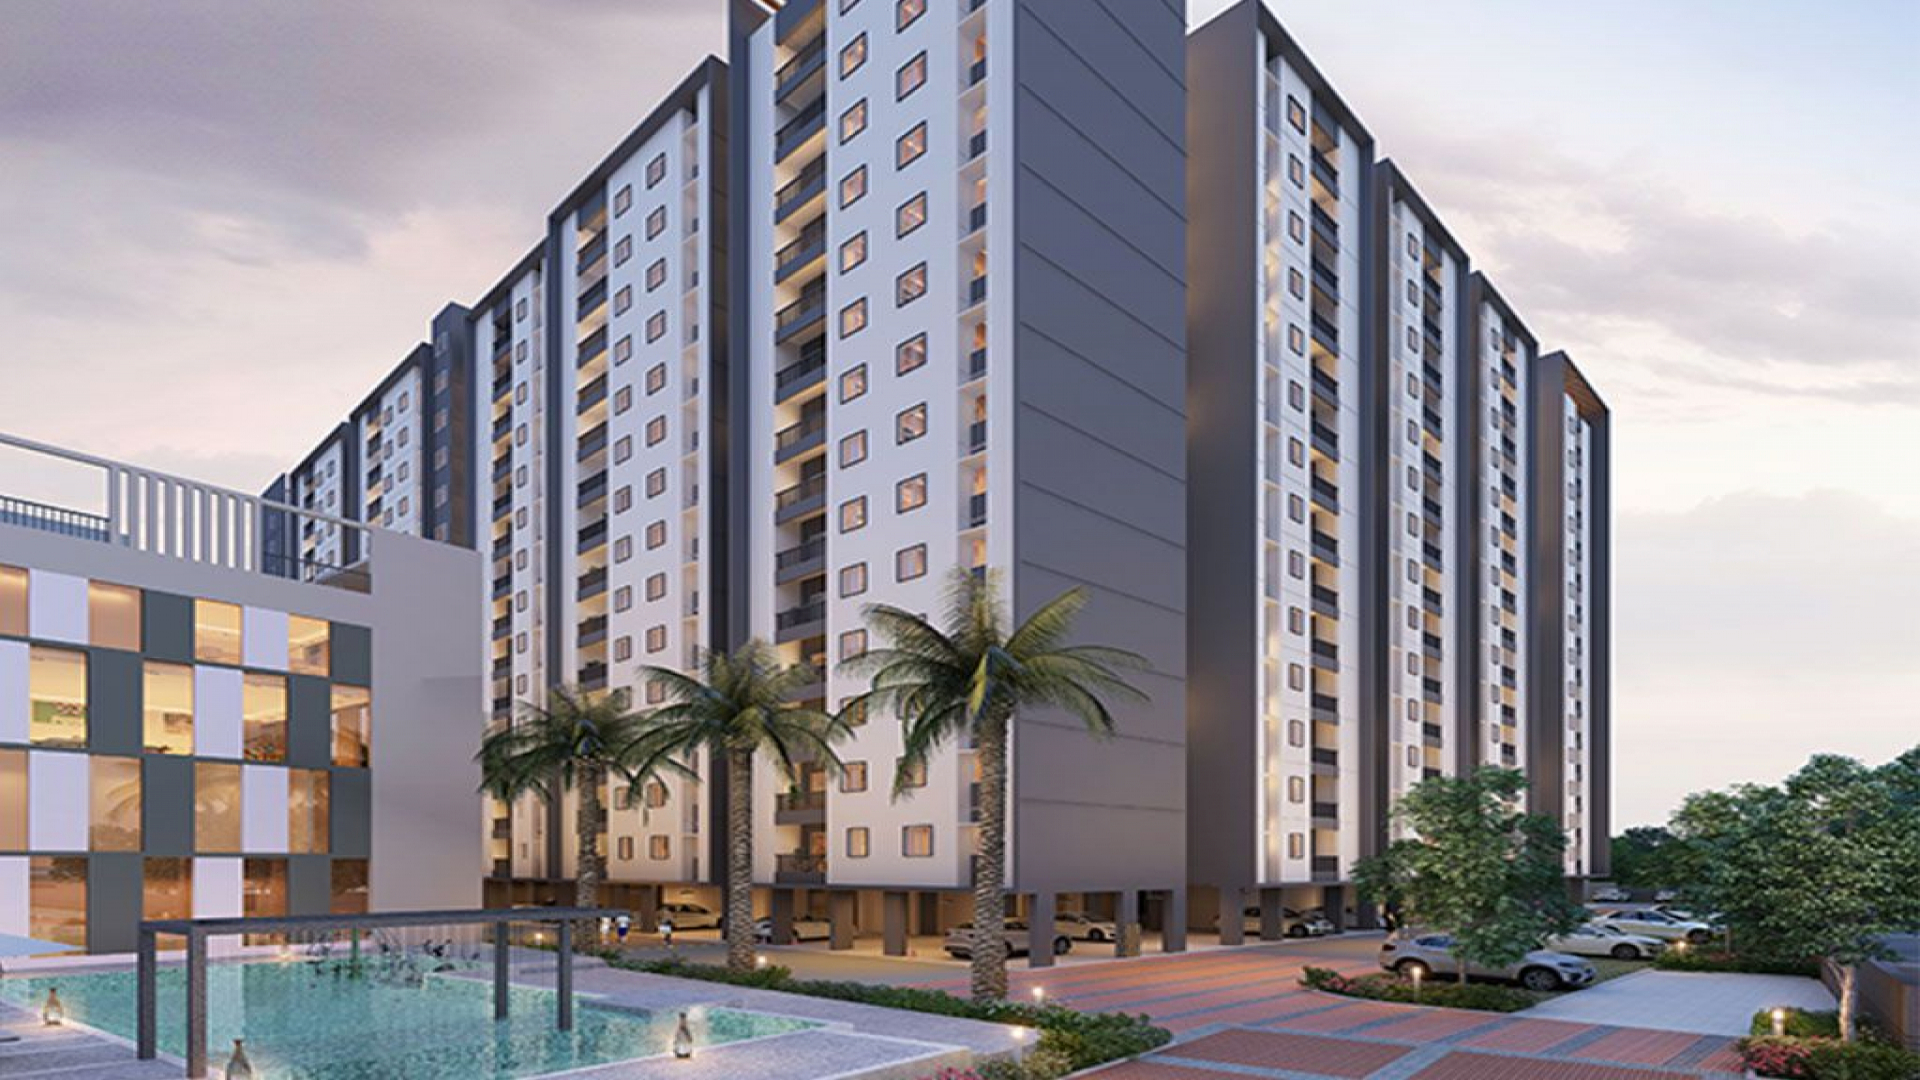 2, 3 BHK Apartment for sale in Medavakkam